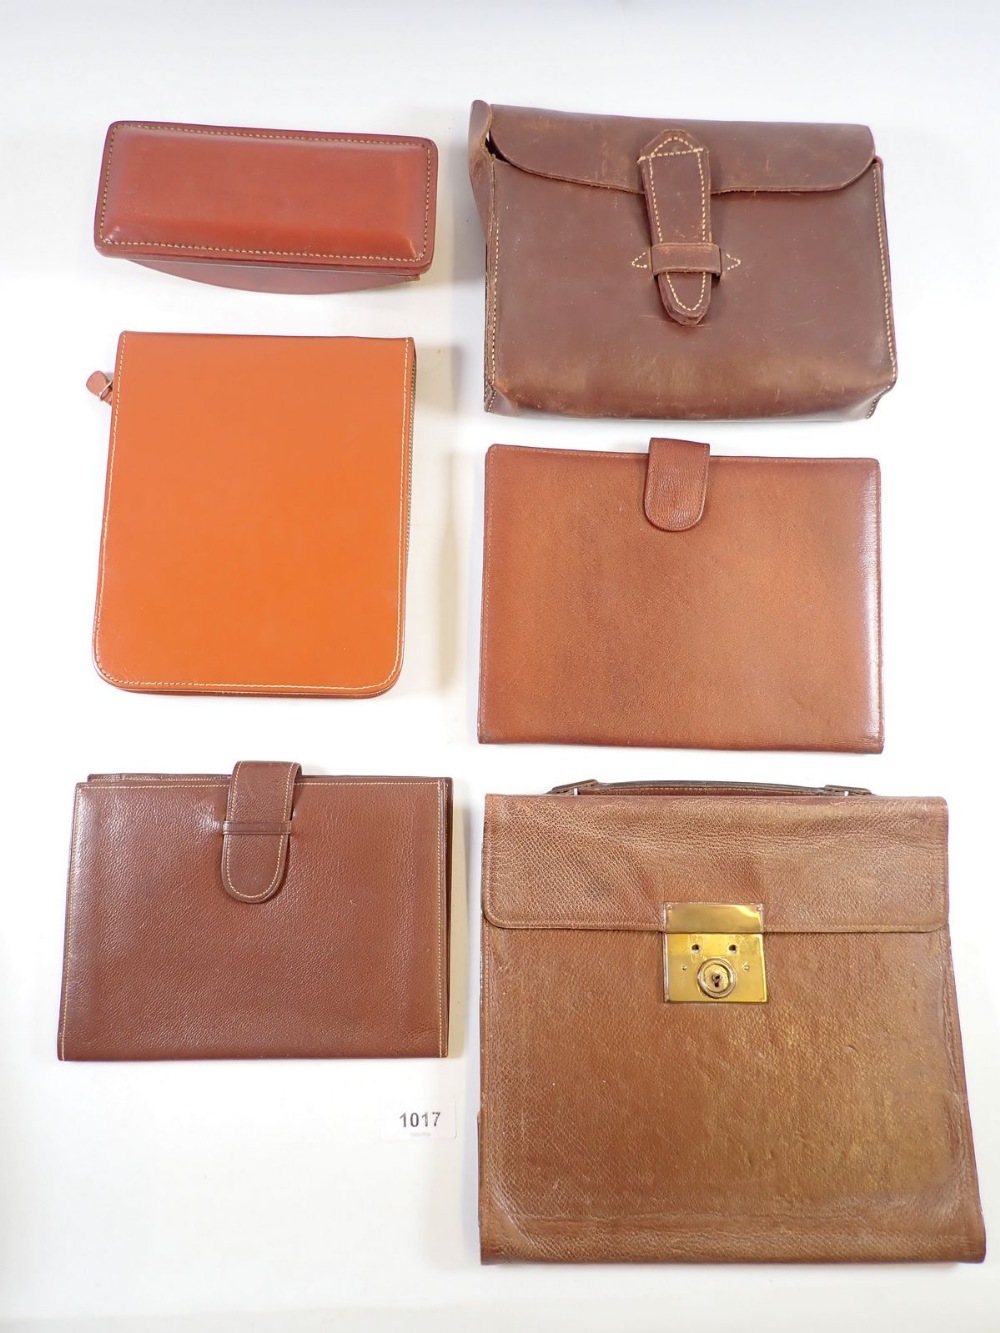 Four leather correspondence/wallets, a leather blotter and a leather pouch